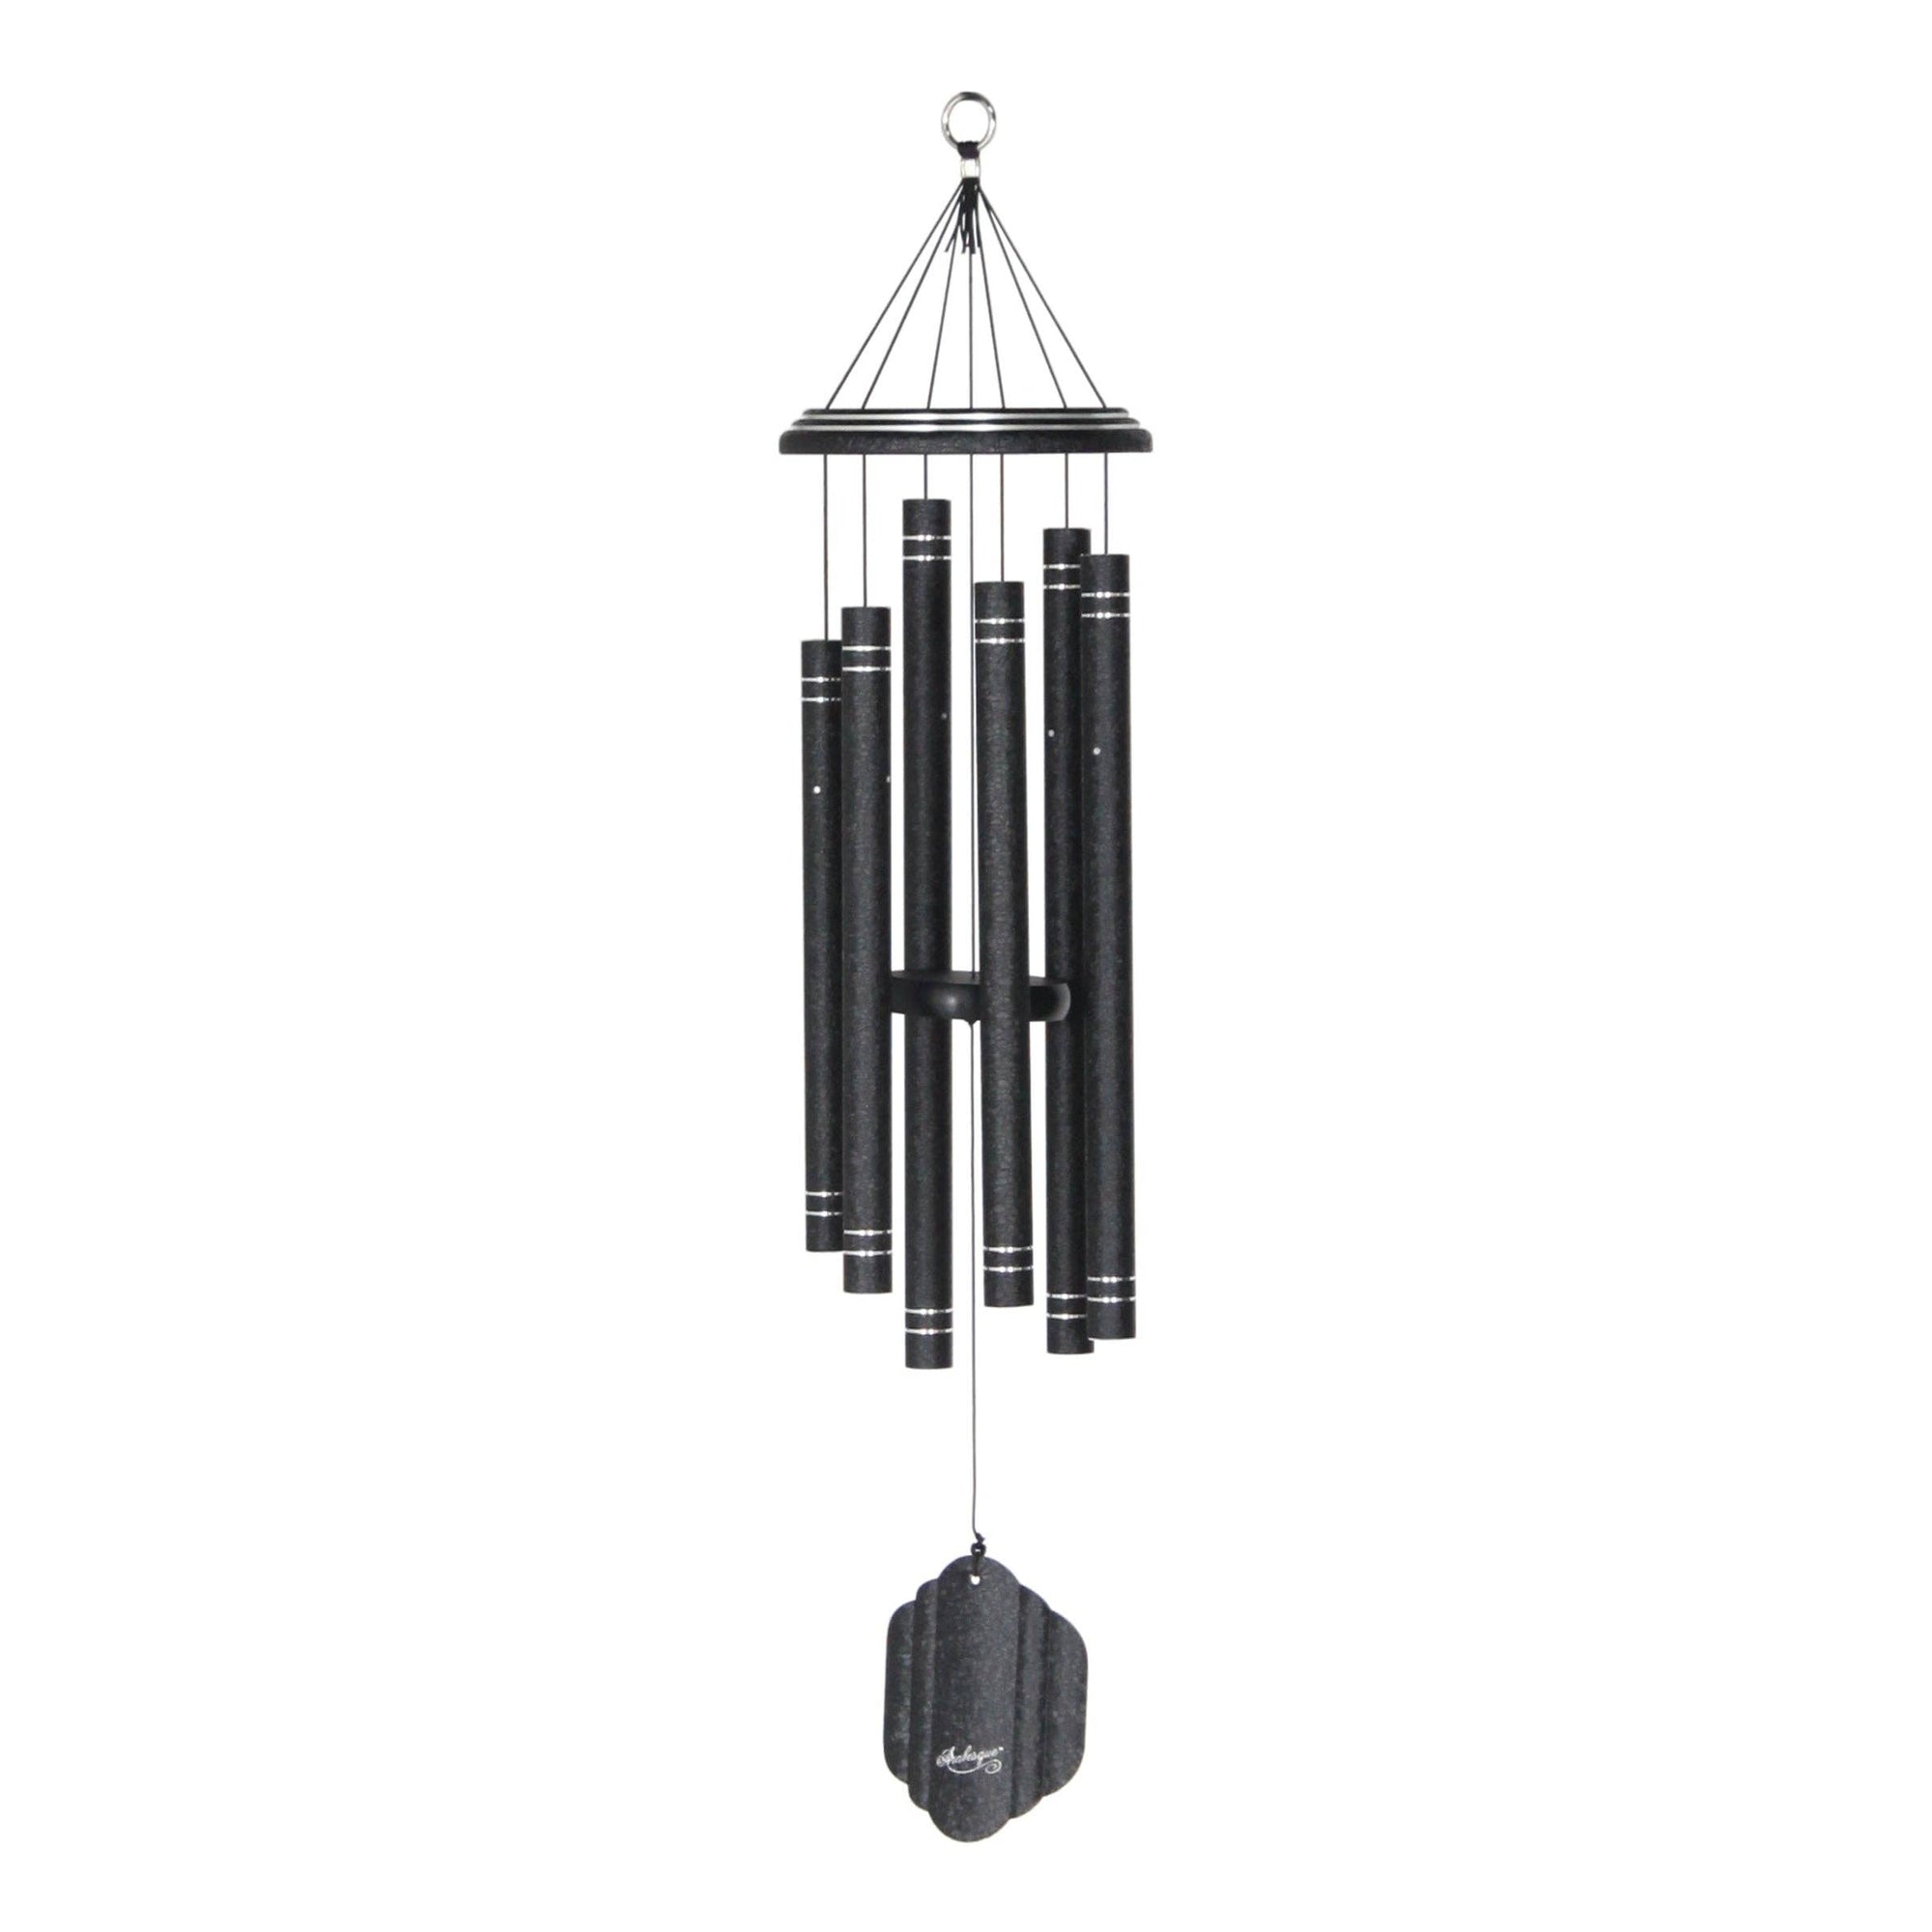 A unique 36" Windchime Arabesque® hanging on a white background - the perfect gift for holidays and birthdays.